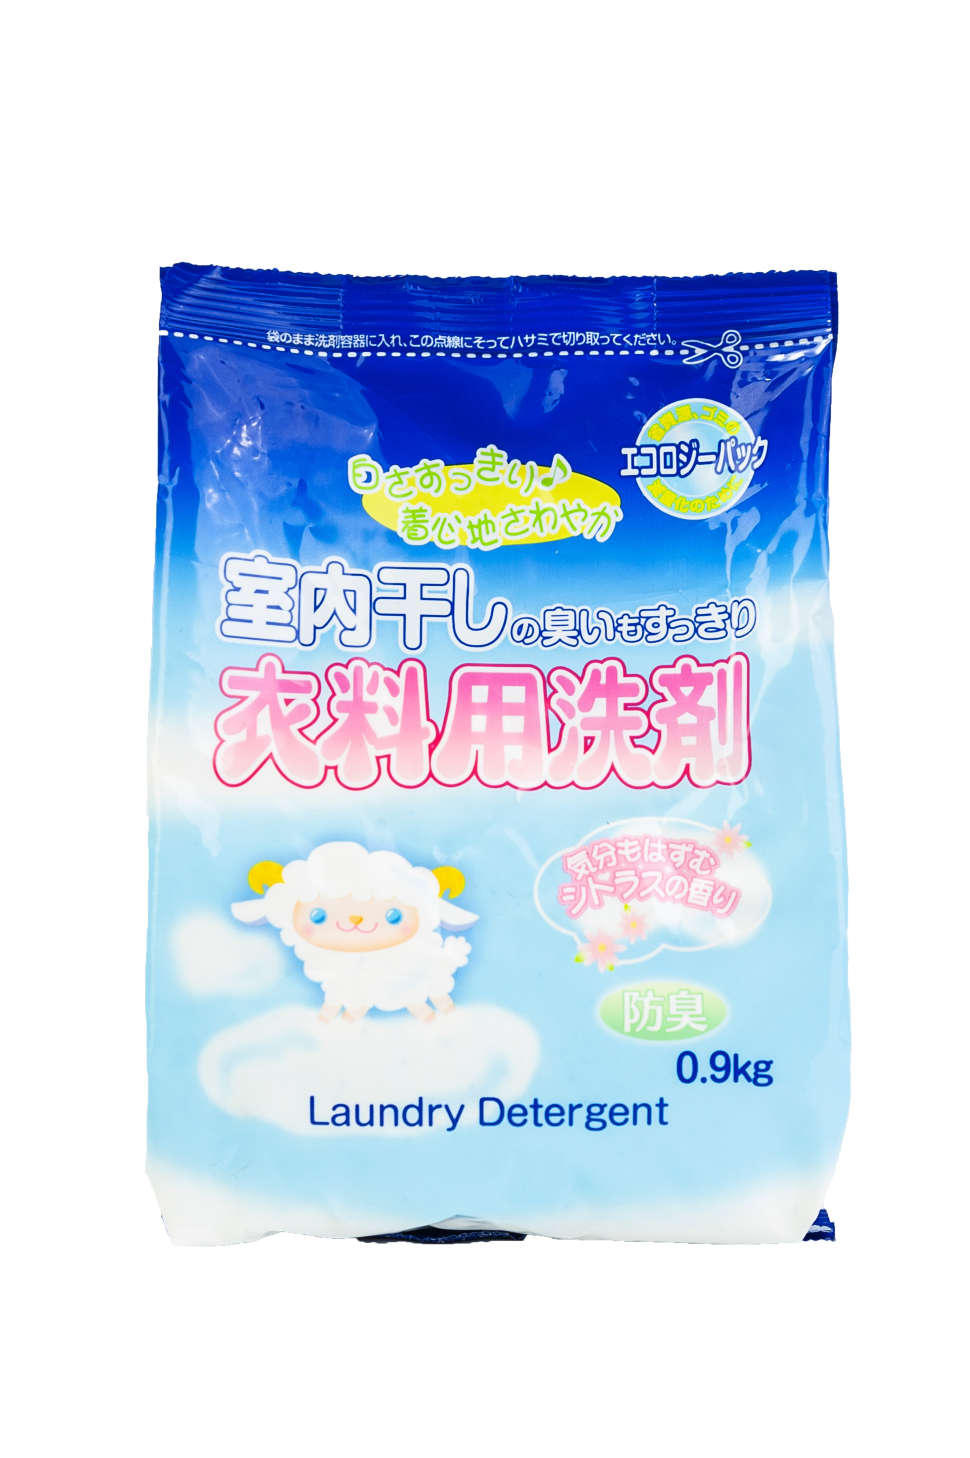 RS Detergent powder designed for drying clothes indoors 